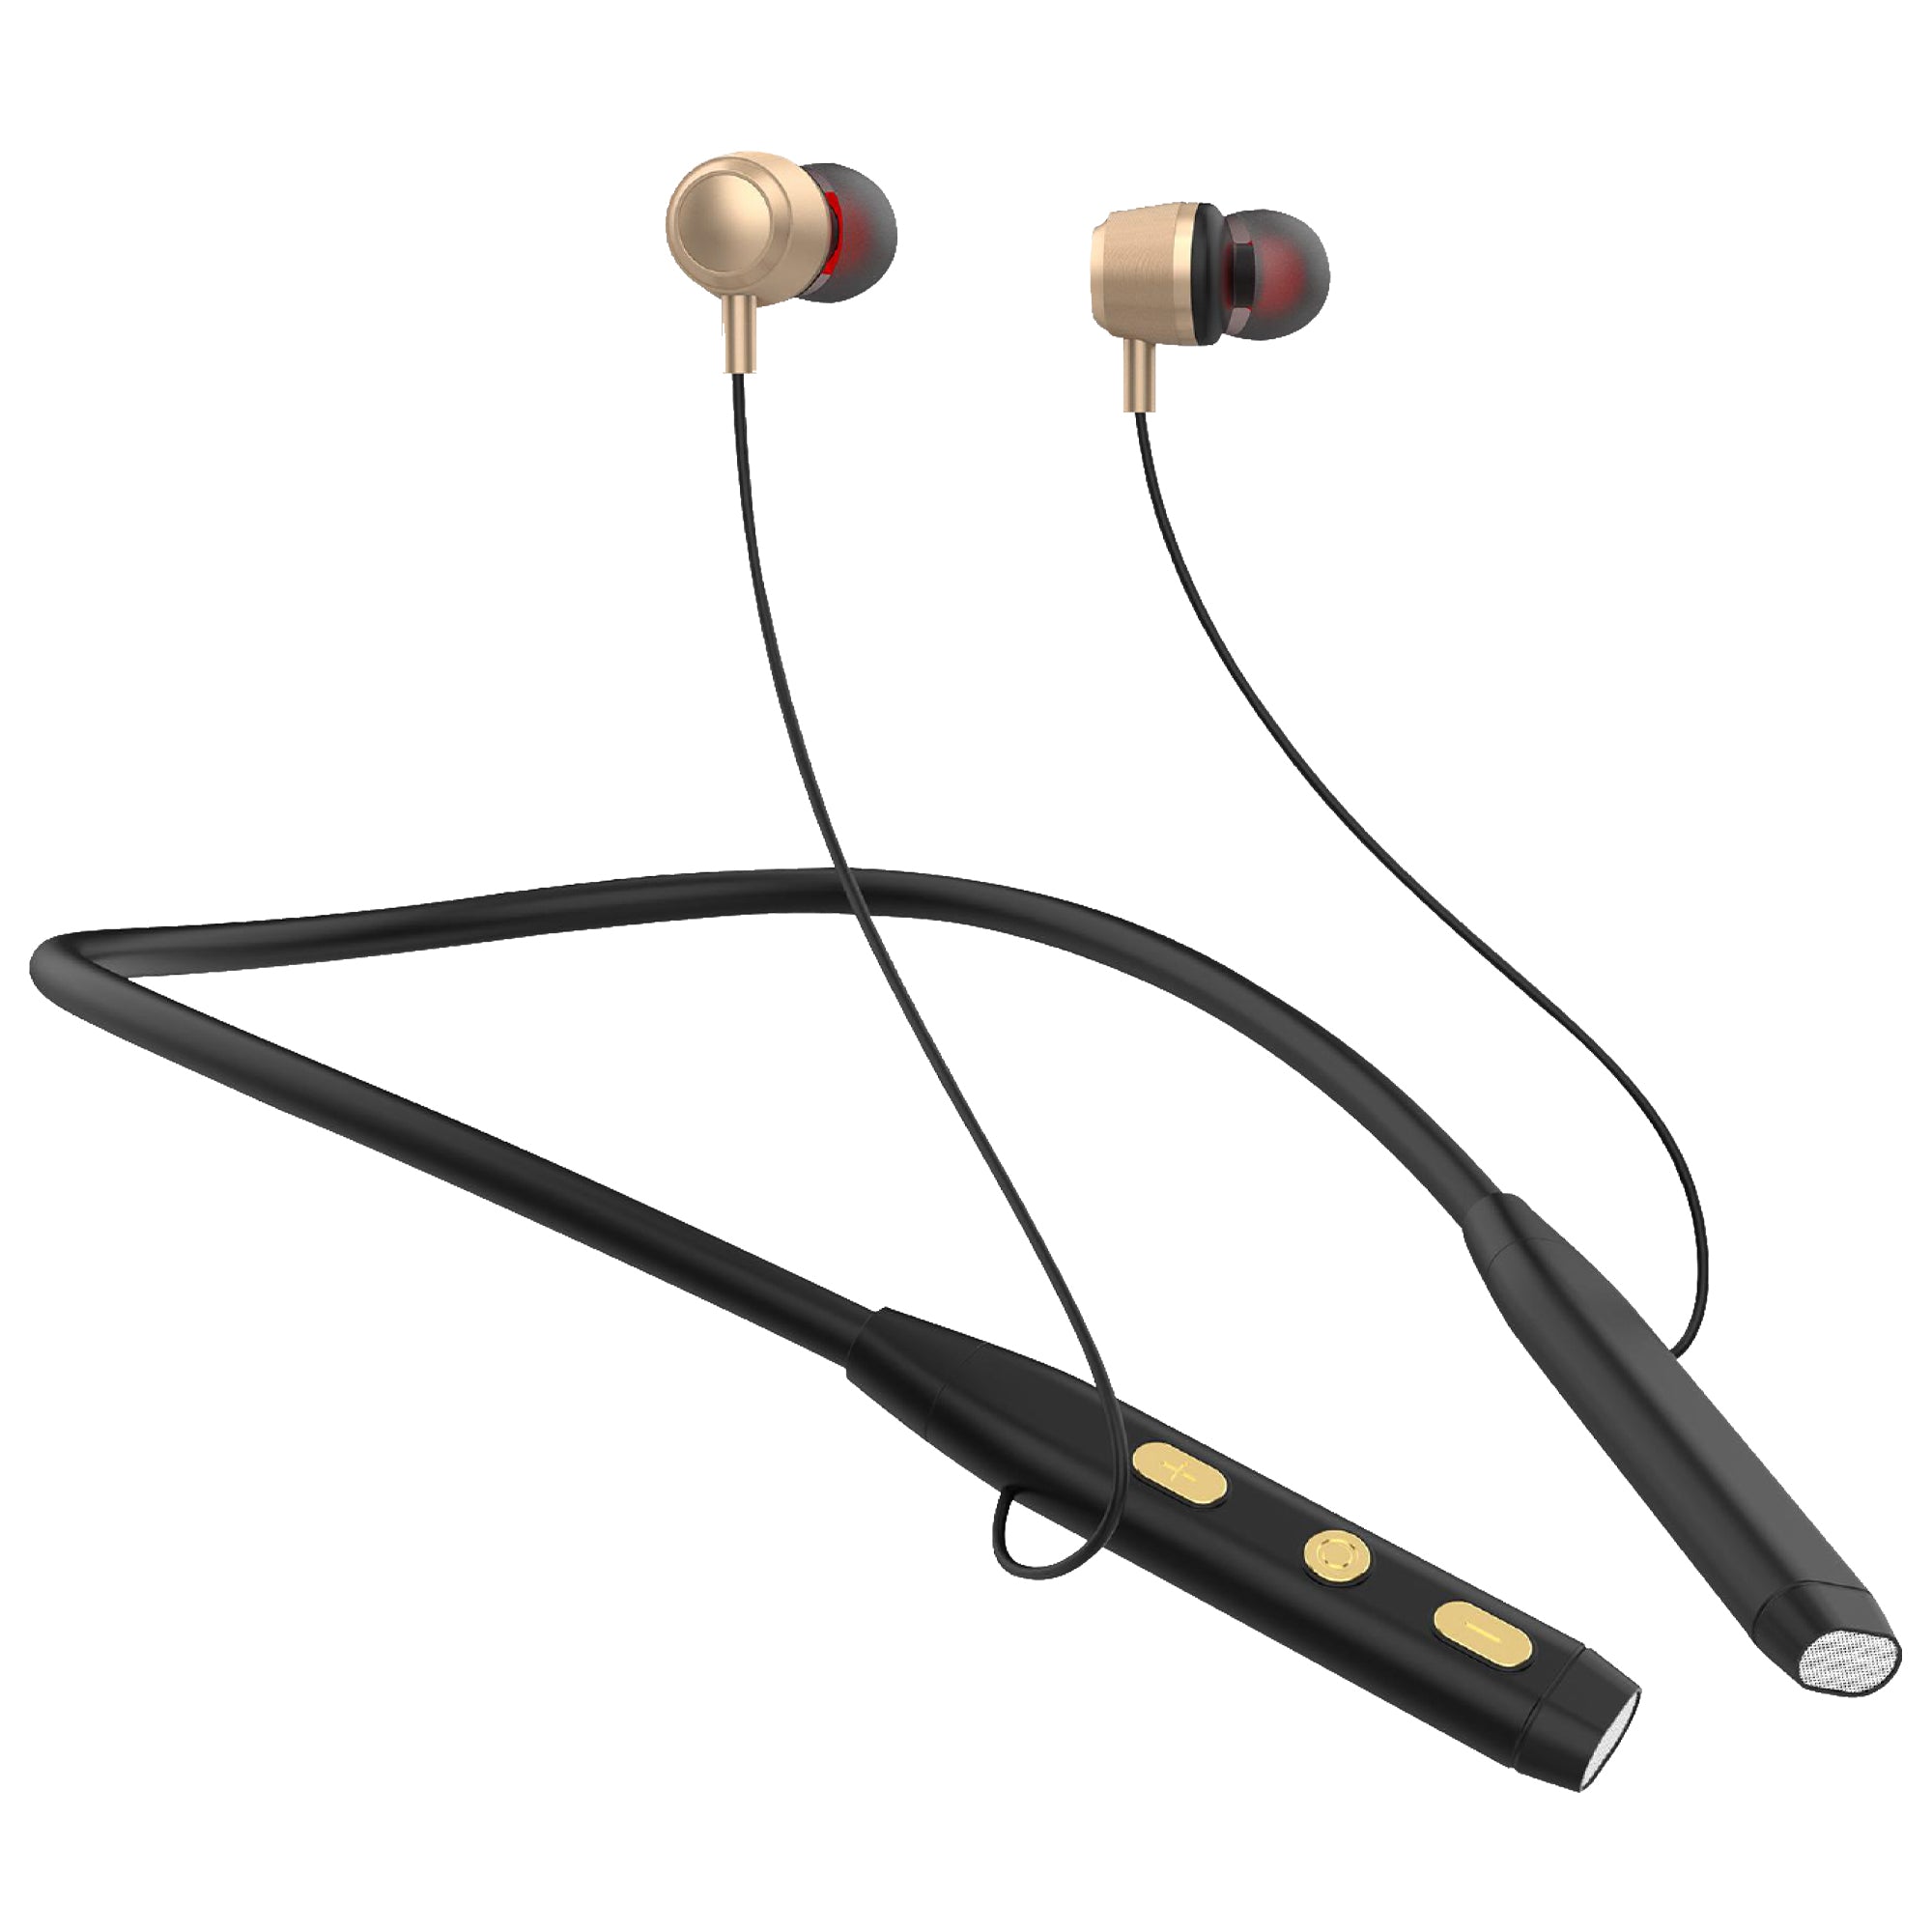 GIZMORE MN226 Jazz Bluetooth Wireless 5.0 in Ear Neckband Earphone with mic, Up to 25 HRS Playtime, Dual Pairing, Hi-Fi Stereo Sound, Multiple Controls and Lightweight